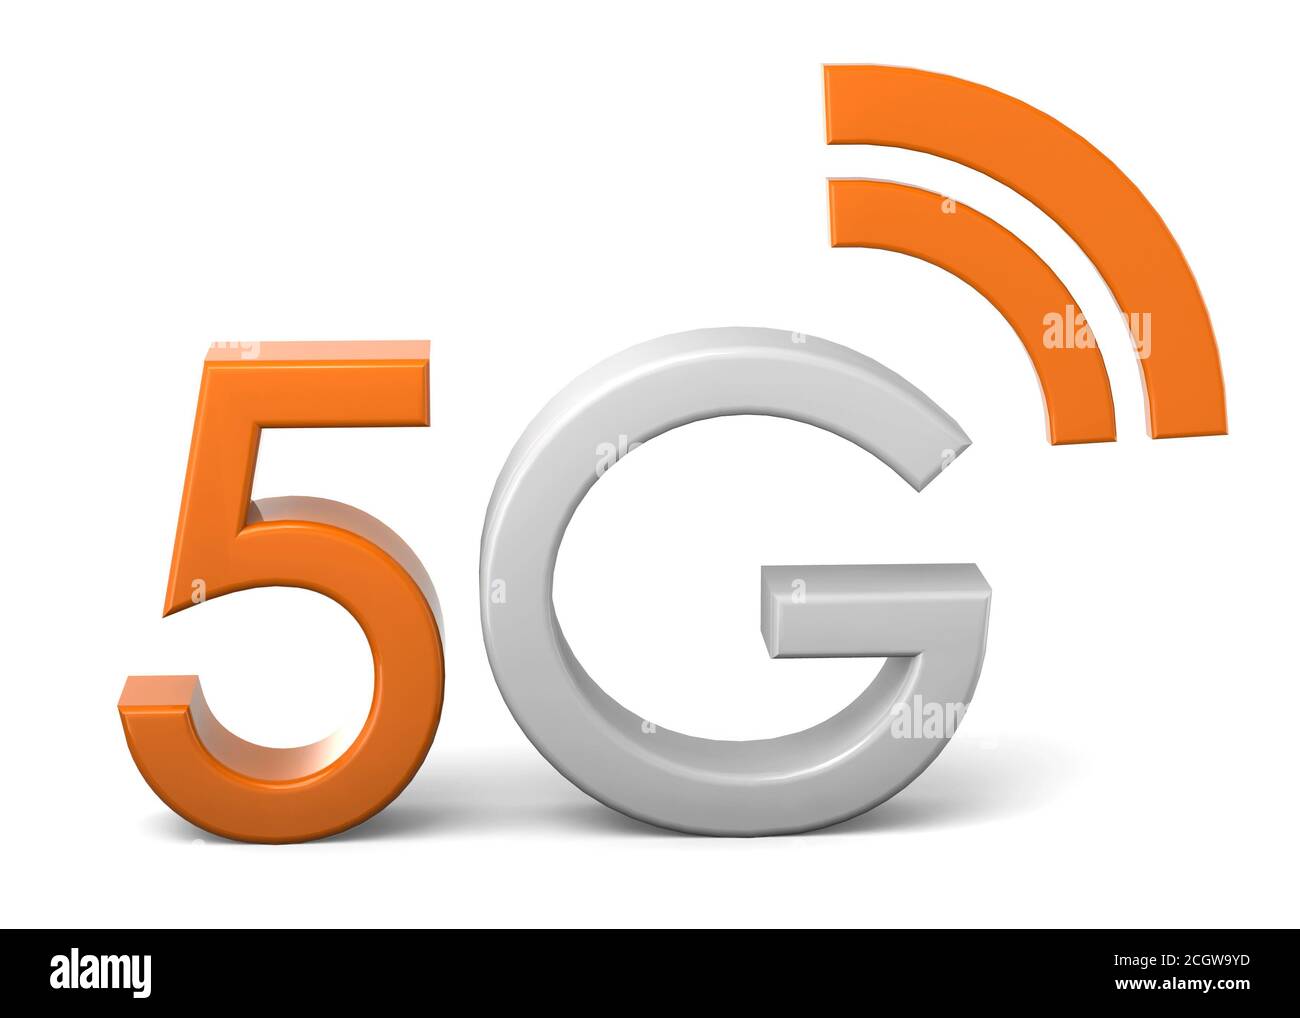 5G Connection - 3D Stock Photo